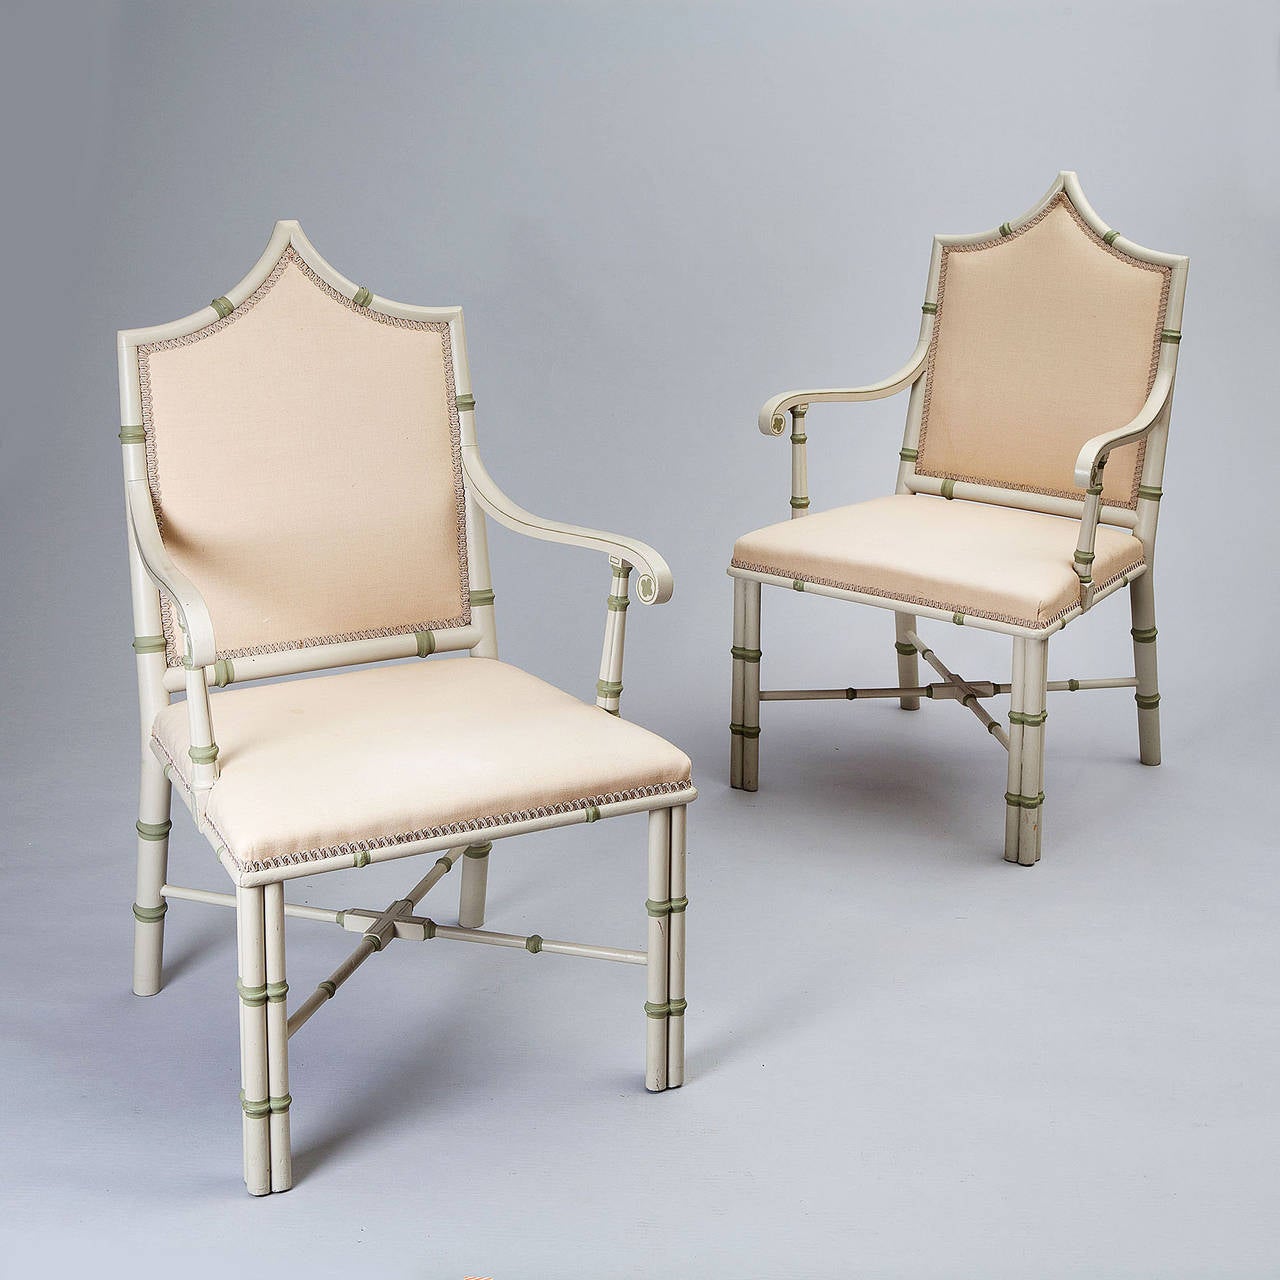 Pair of Cream-Painted Gothic Armchairs Attributed to Colefax and Fowler In Excellent Condition In London, by appointment only